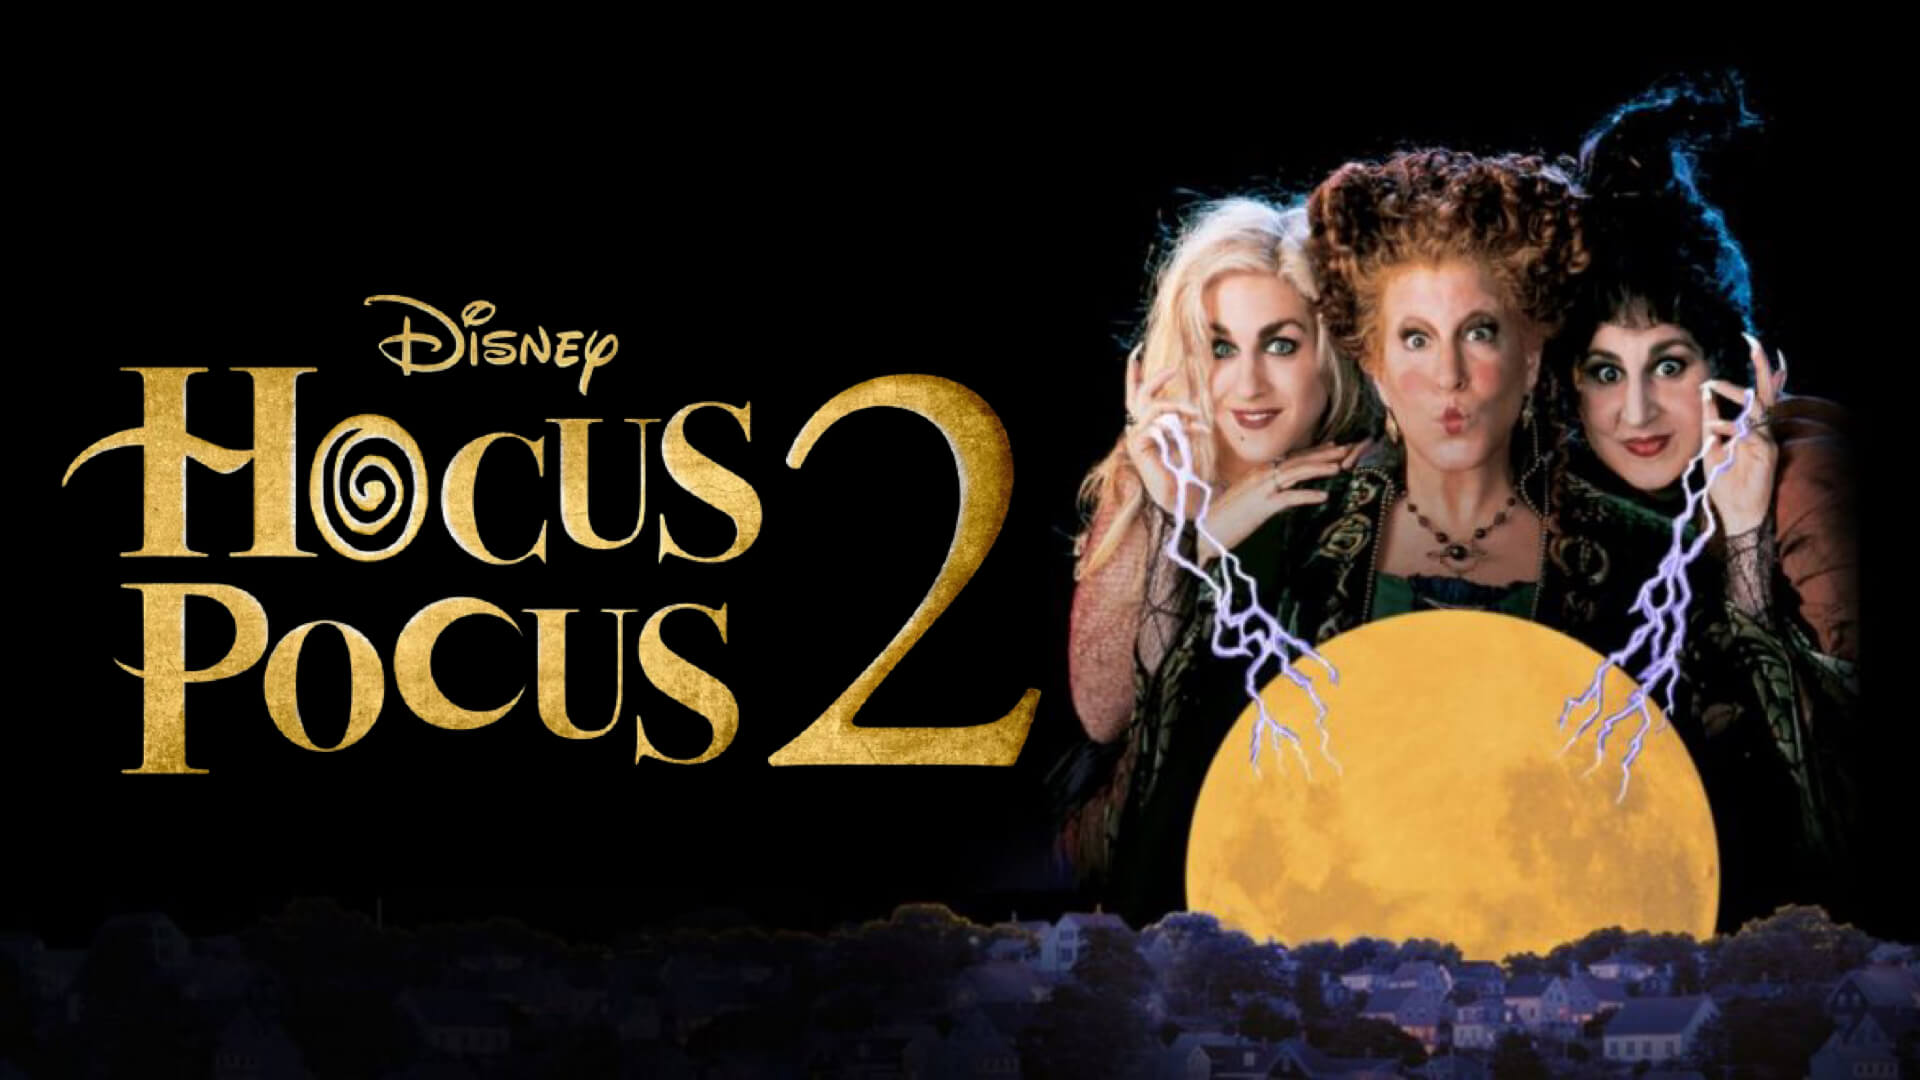 ‘Hocus Pocus 2’ to Film This October Under The Working Title “Candles”